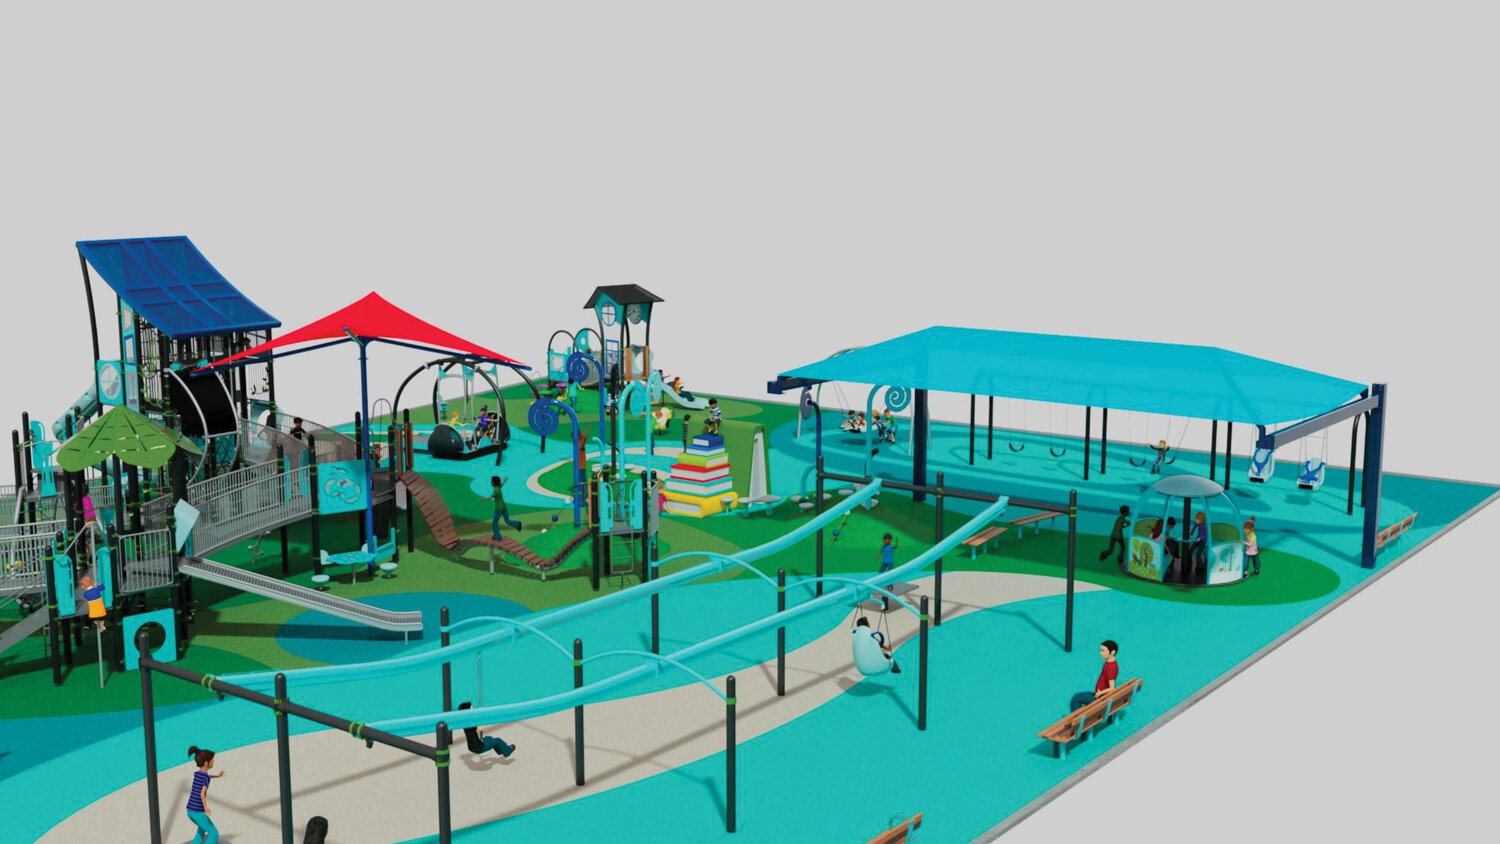 The fully inclusive playground was designed by Landscape Strucures, and will be the first of its kind in St. Paul.